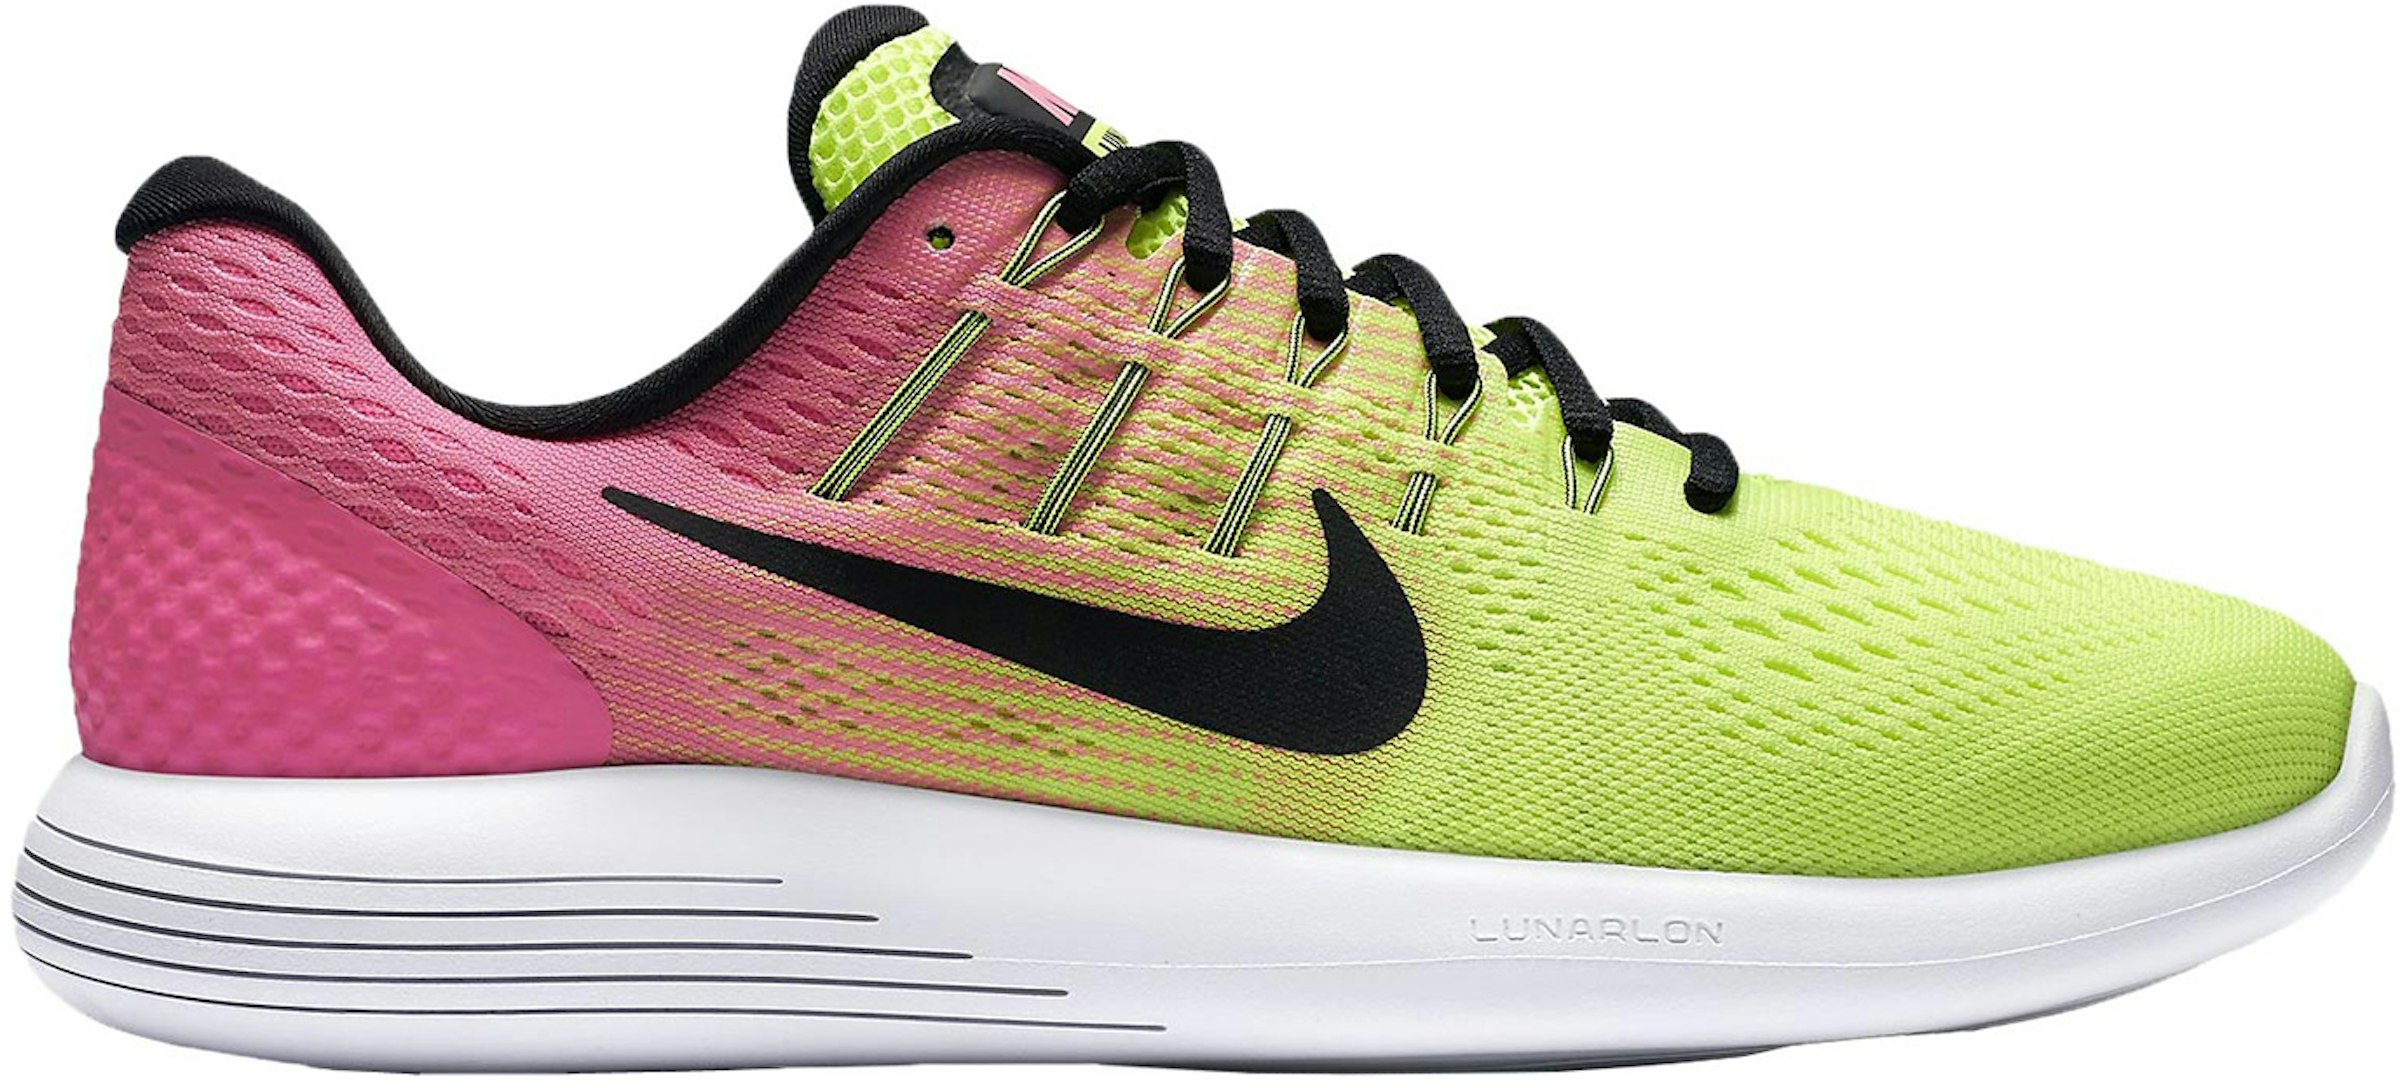 Nike Lunarglide 8 OC Olympic Collection - 844632-999 - US